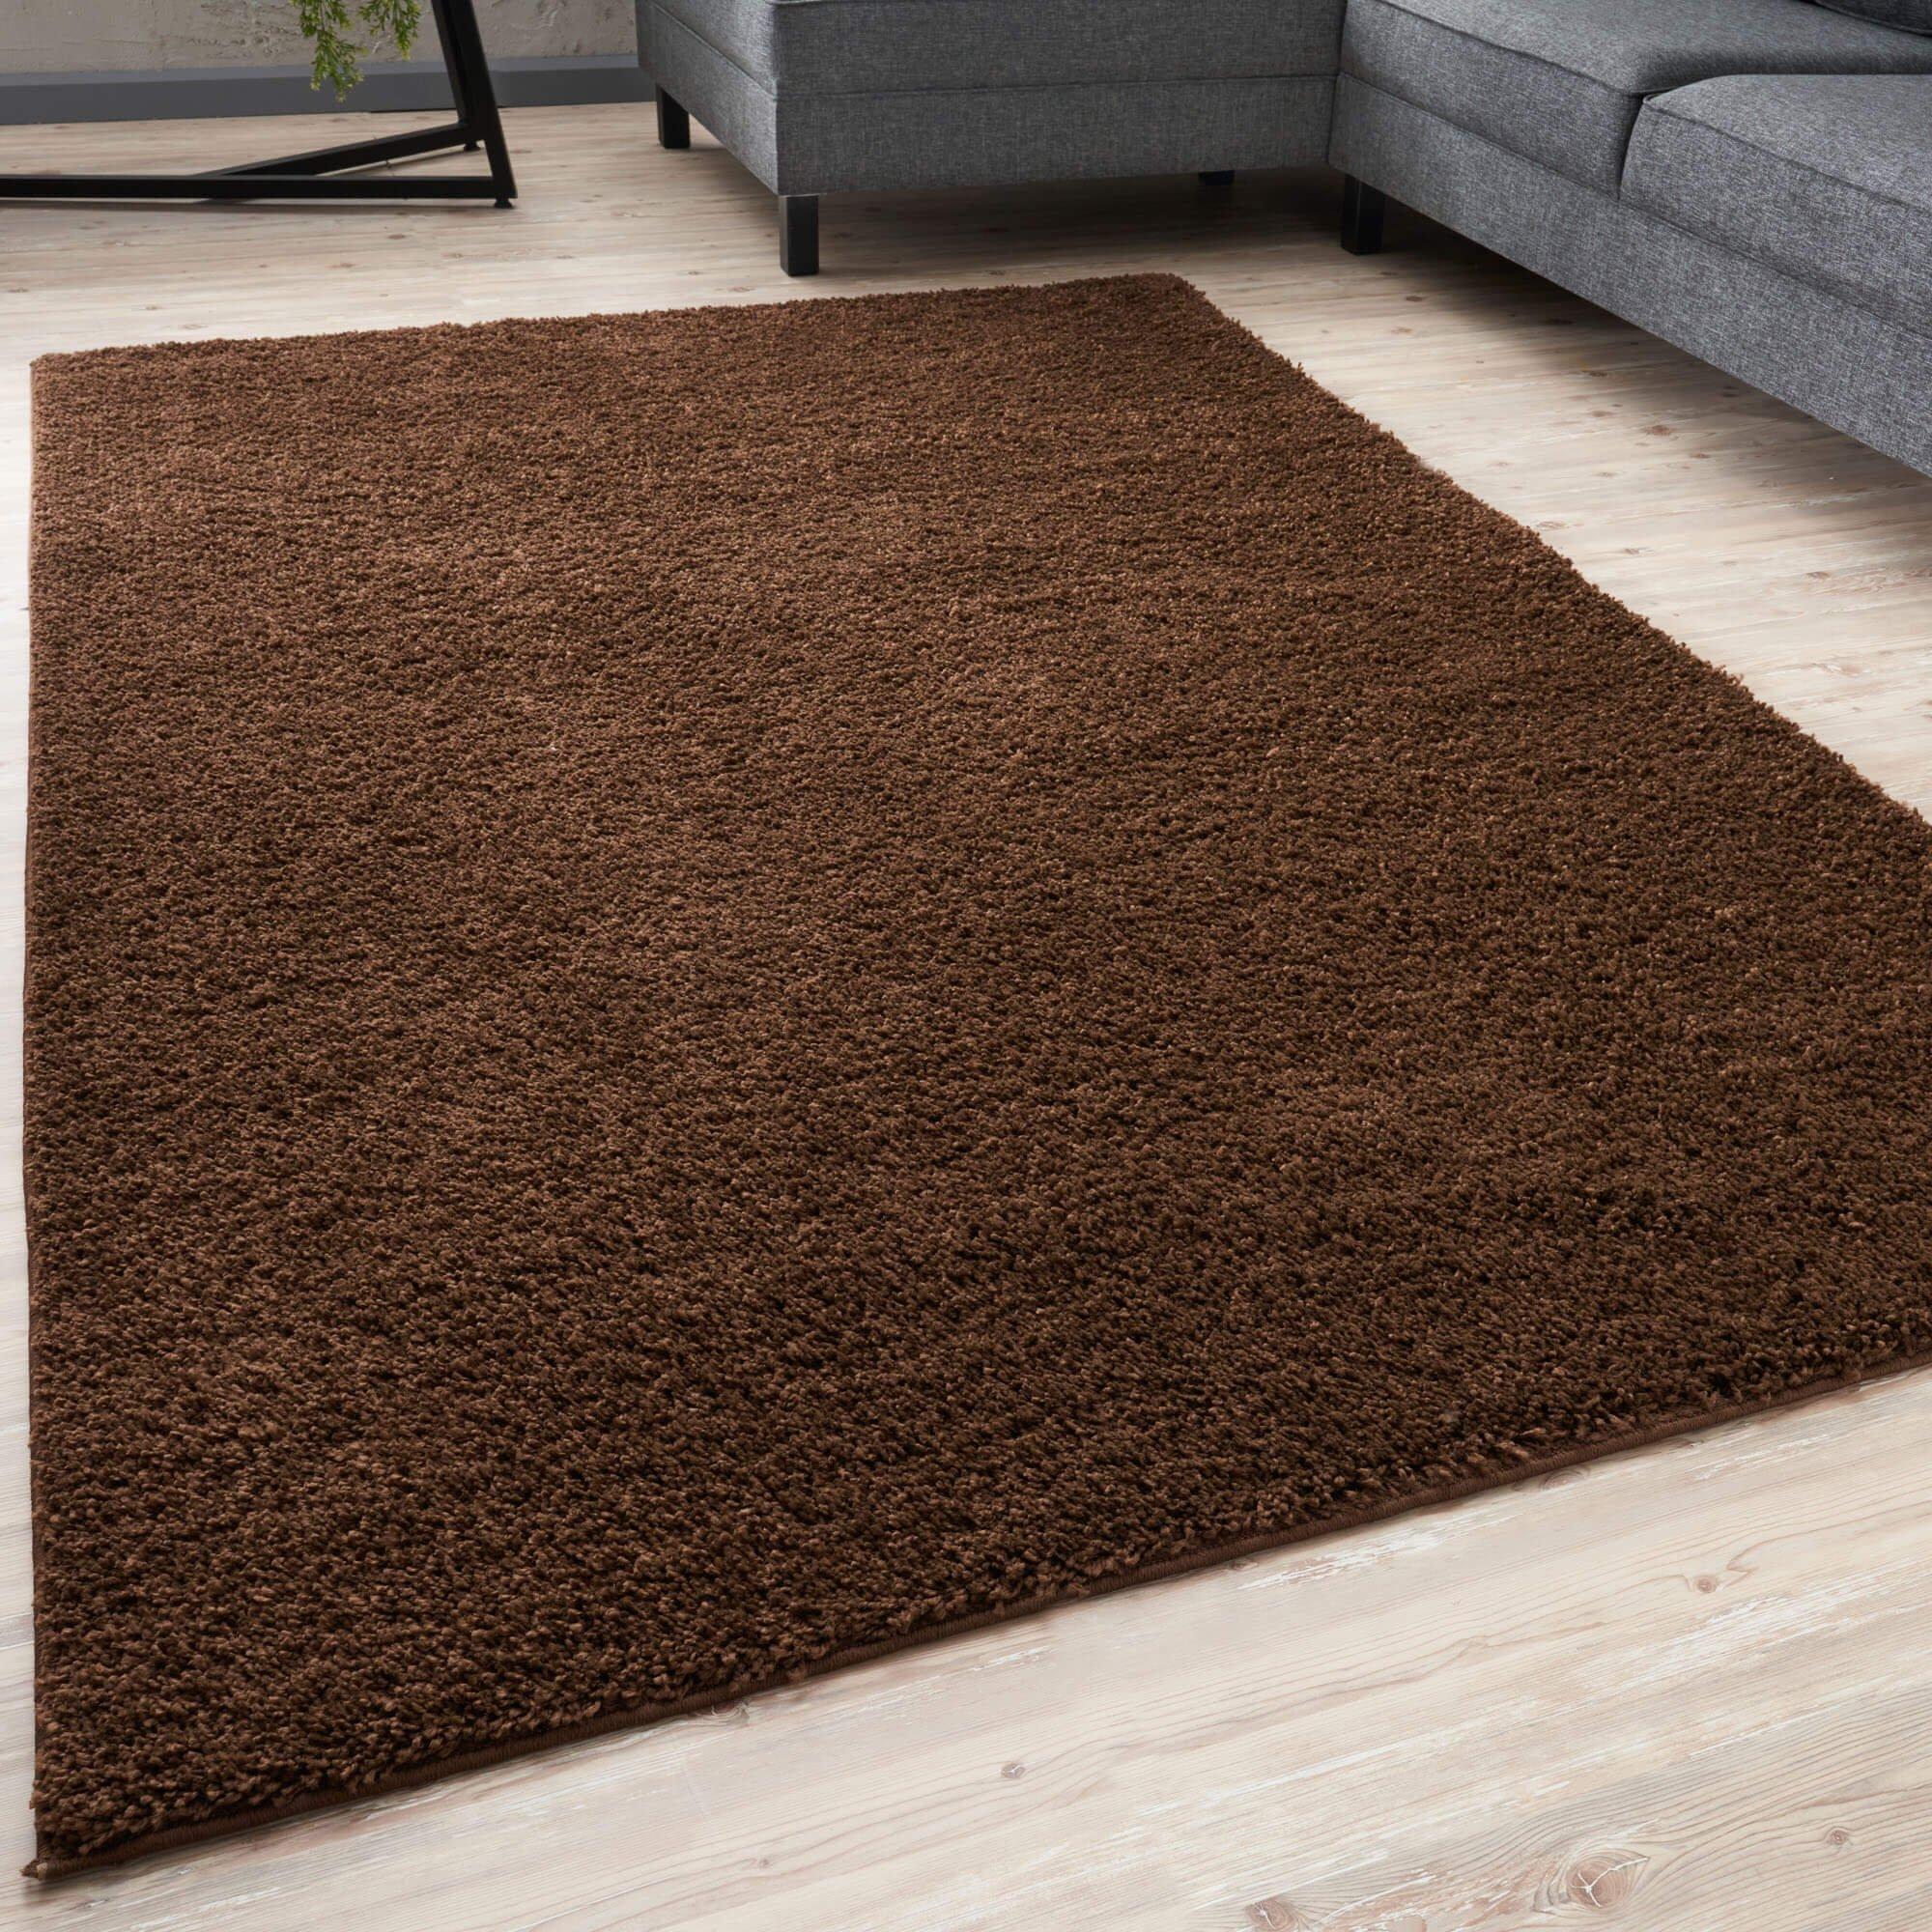 Myshaggy Collection Rugs Solid Design in Brown